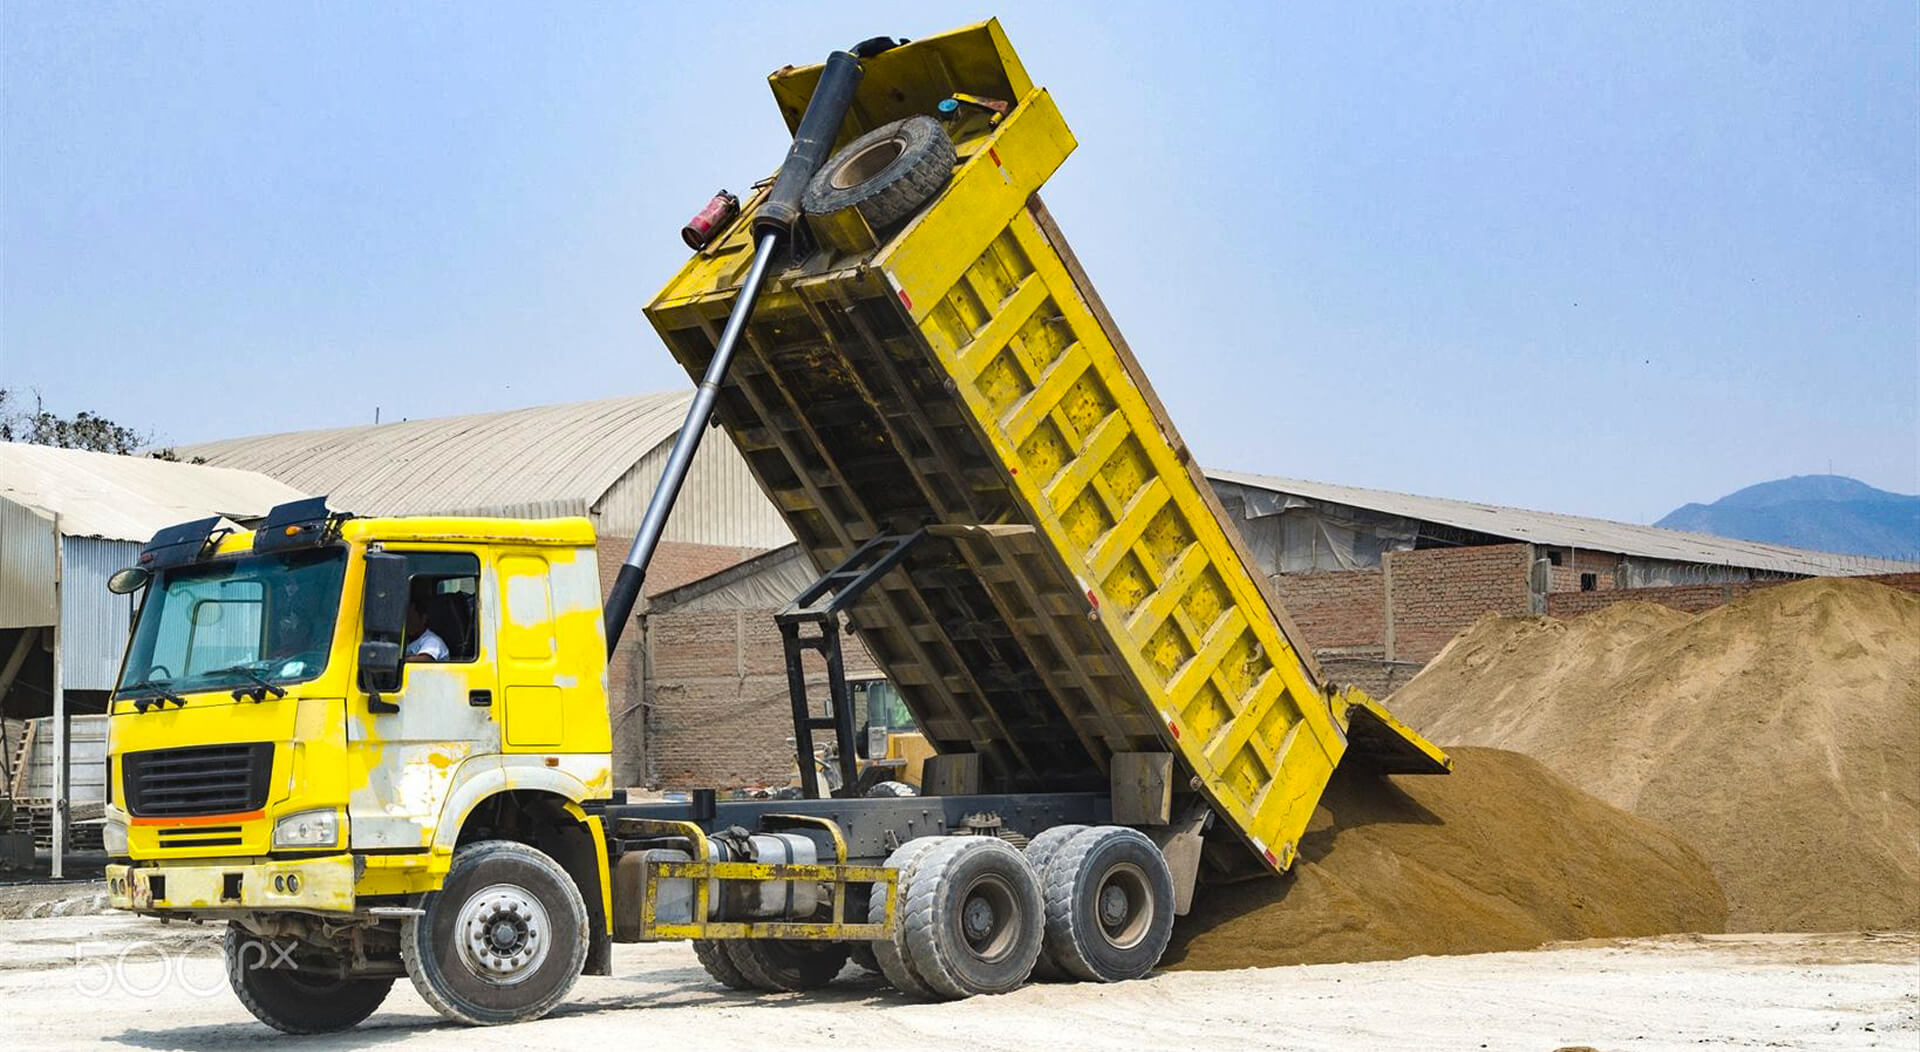 yellow dump truck delivering a load of dirt for a project at a construction site